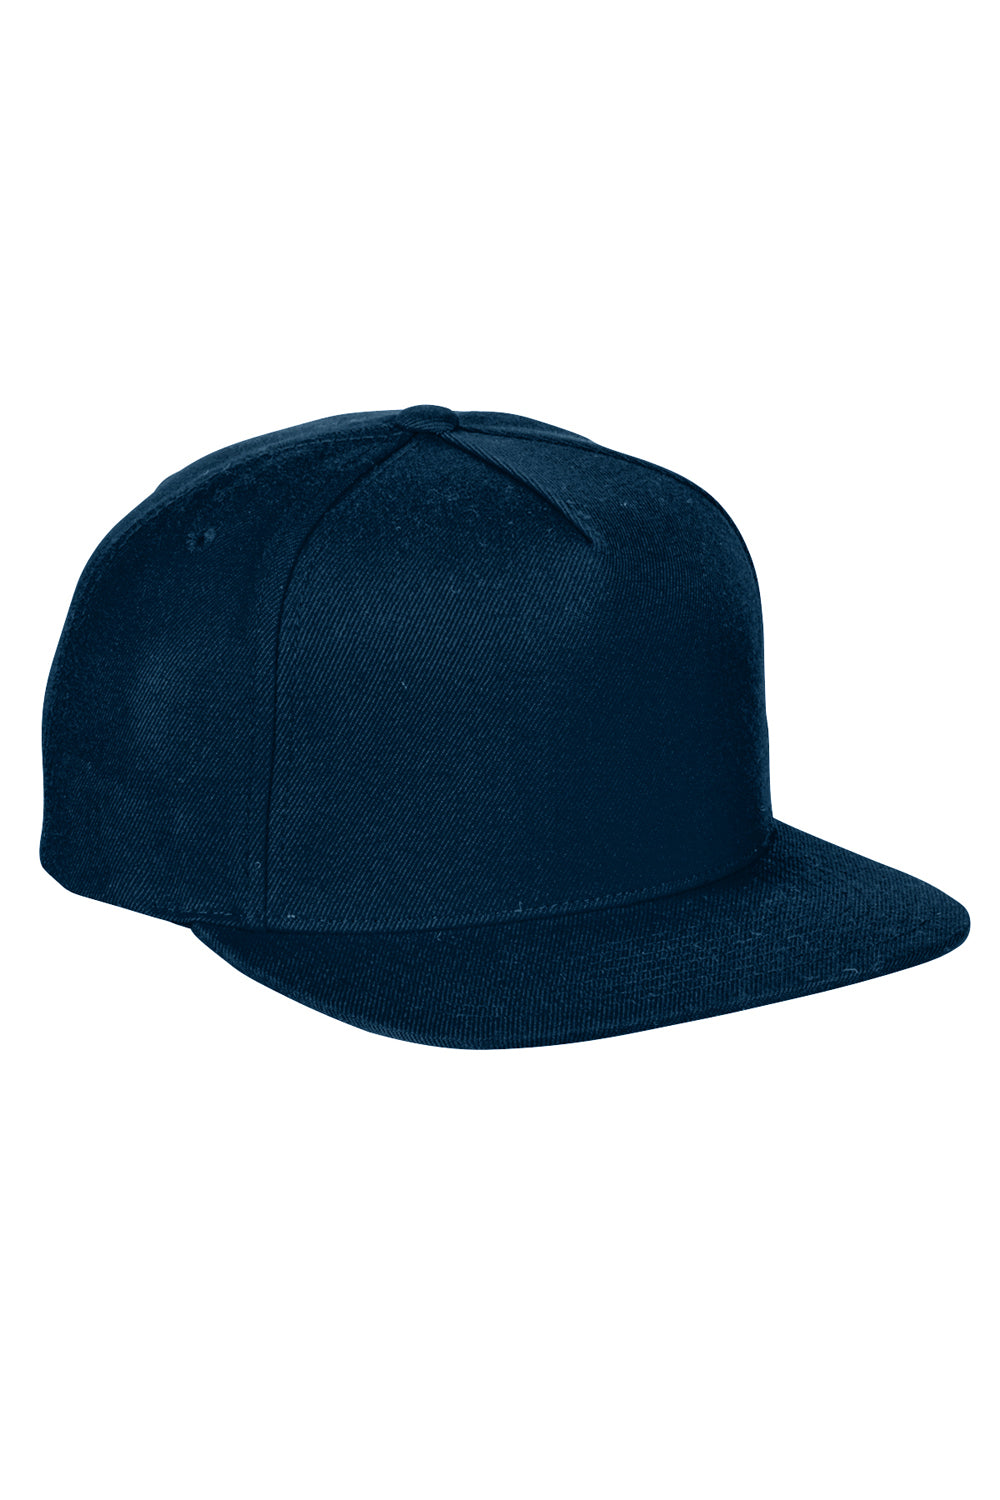 Yupoong YP5089 Mens Adjustable Hat Navy Blue Front